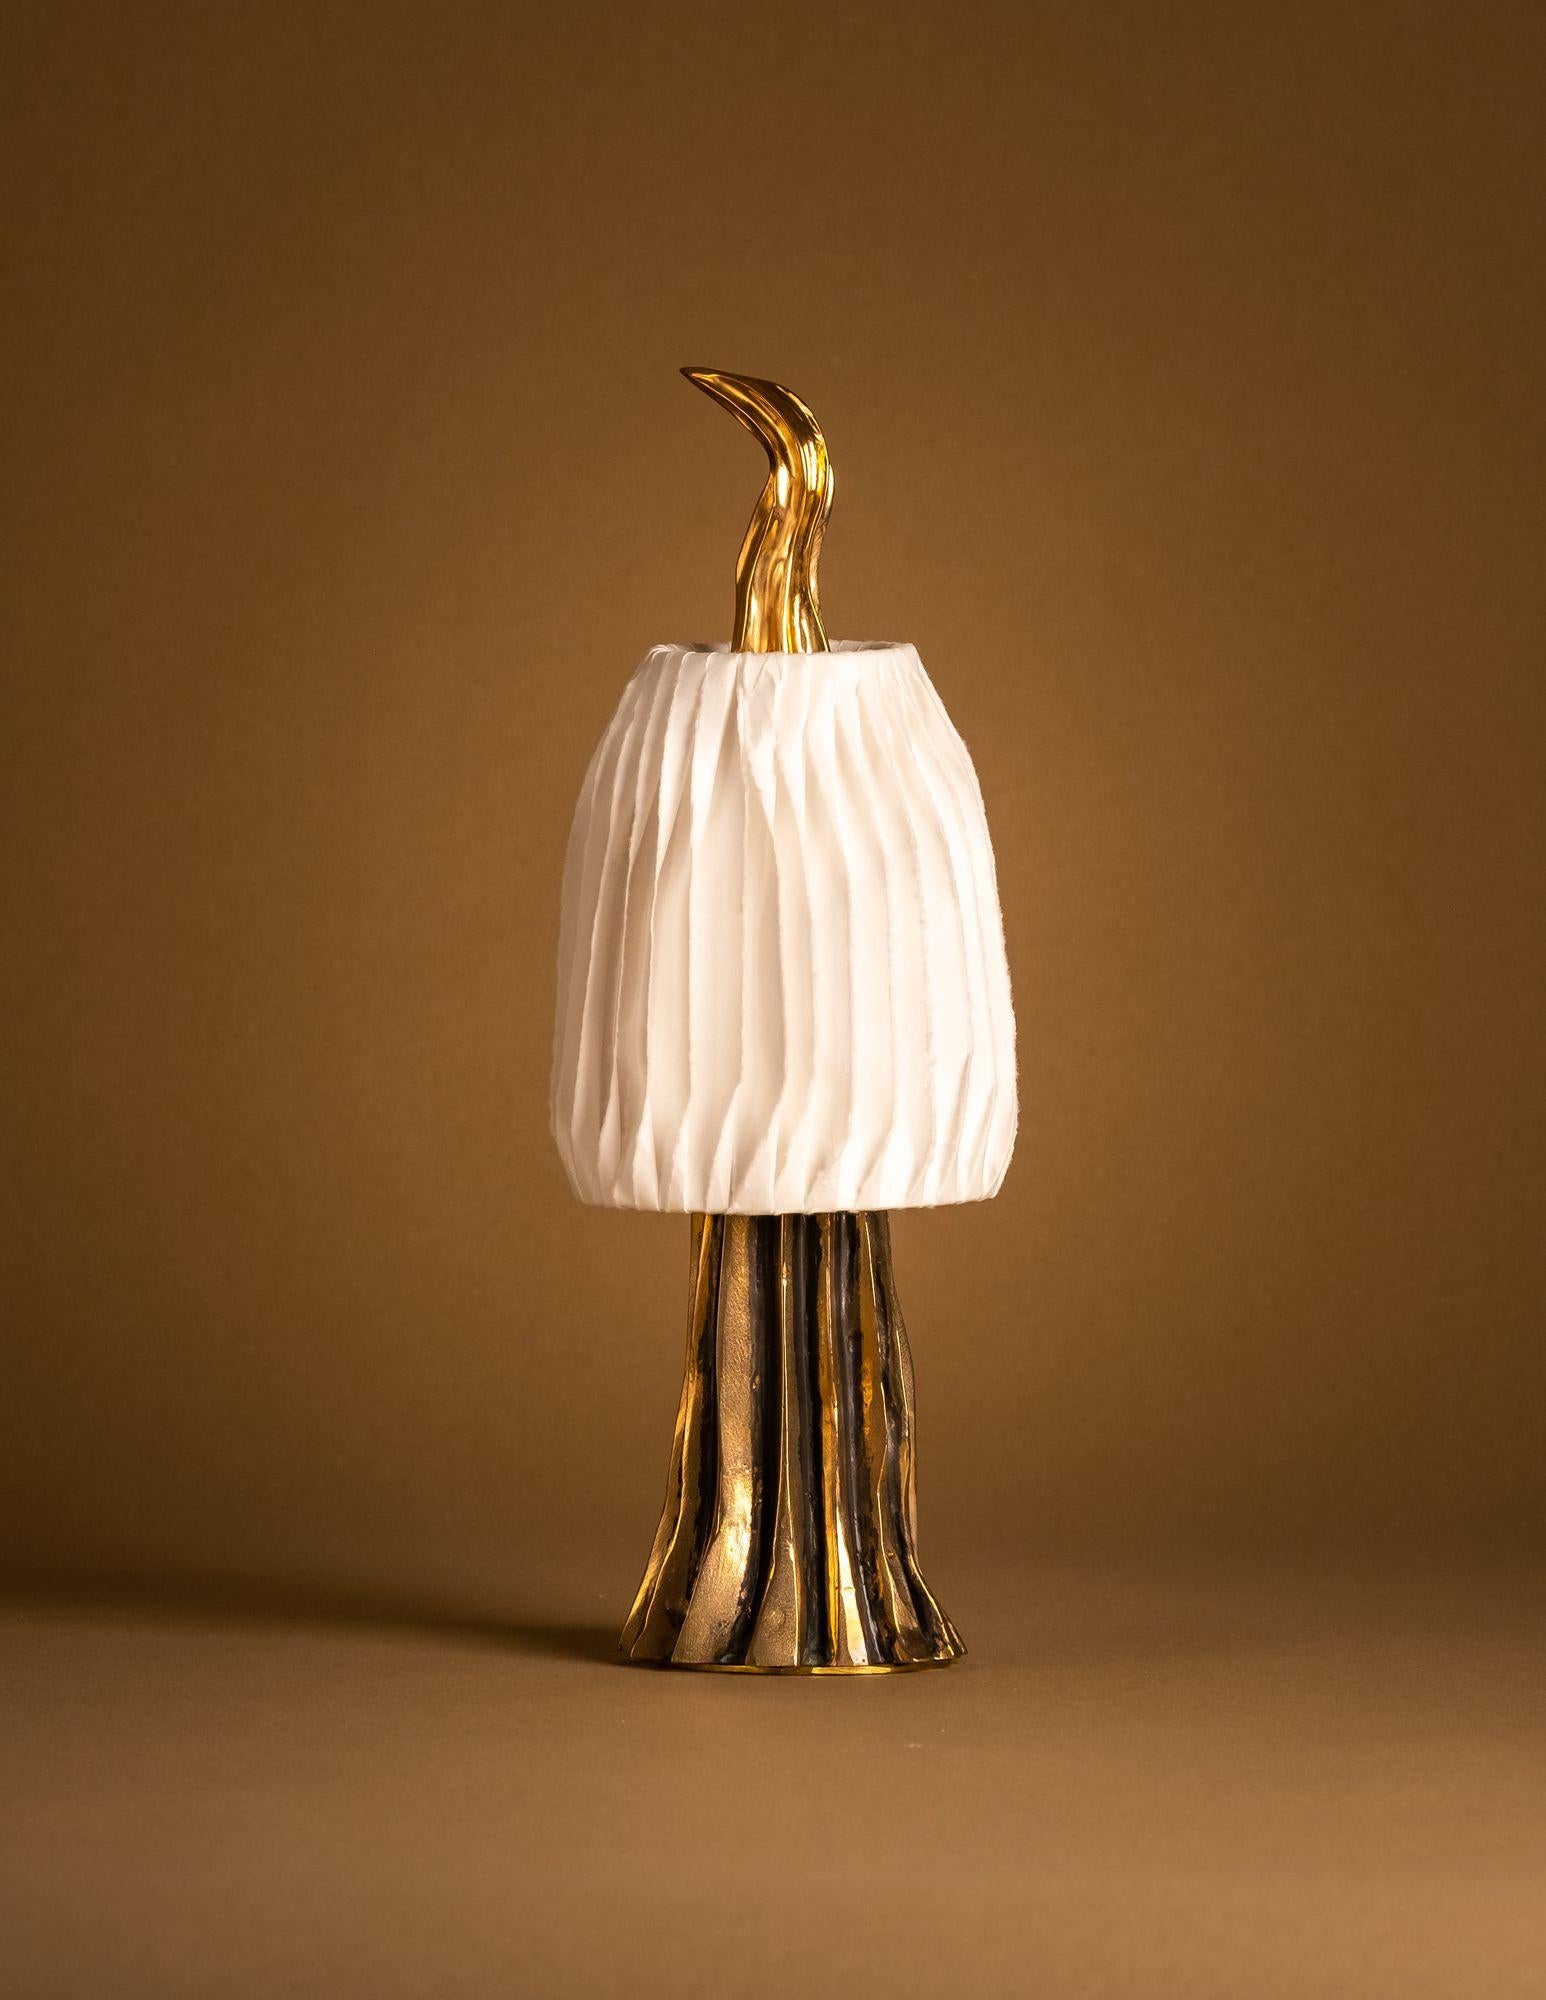 Mini Surculus table lamp by Studio Palatin.
Wireless.
Dimensions: H 30 x D 15 cm.
Materials: Bronze, Japanese hosho paper.

The Surculus Midi und Mini are the smaller brother and sister to the large Surculus lamp. Both are an excellent addition